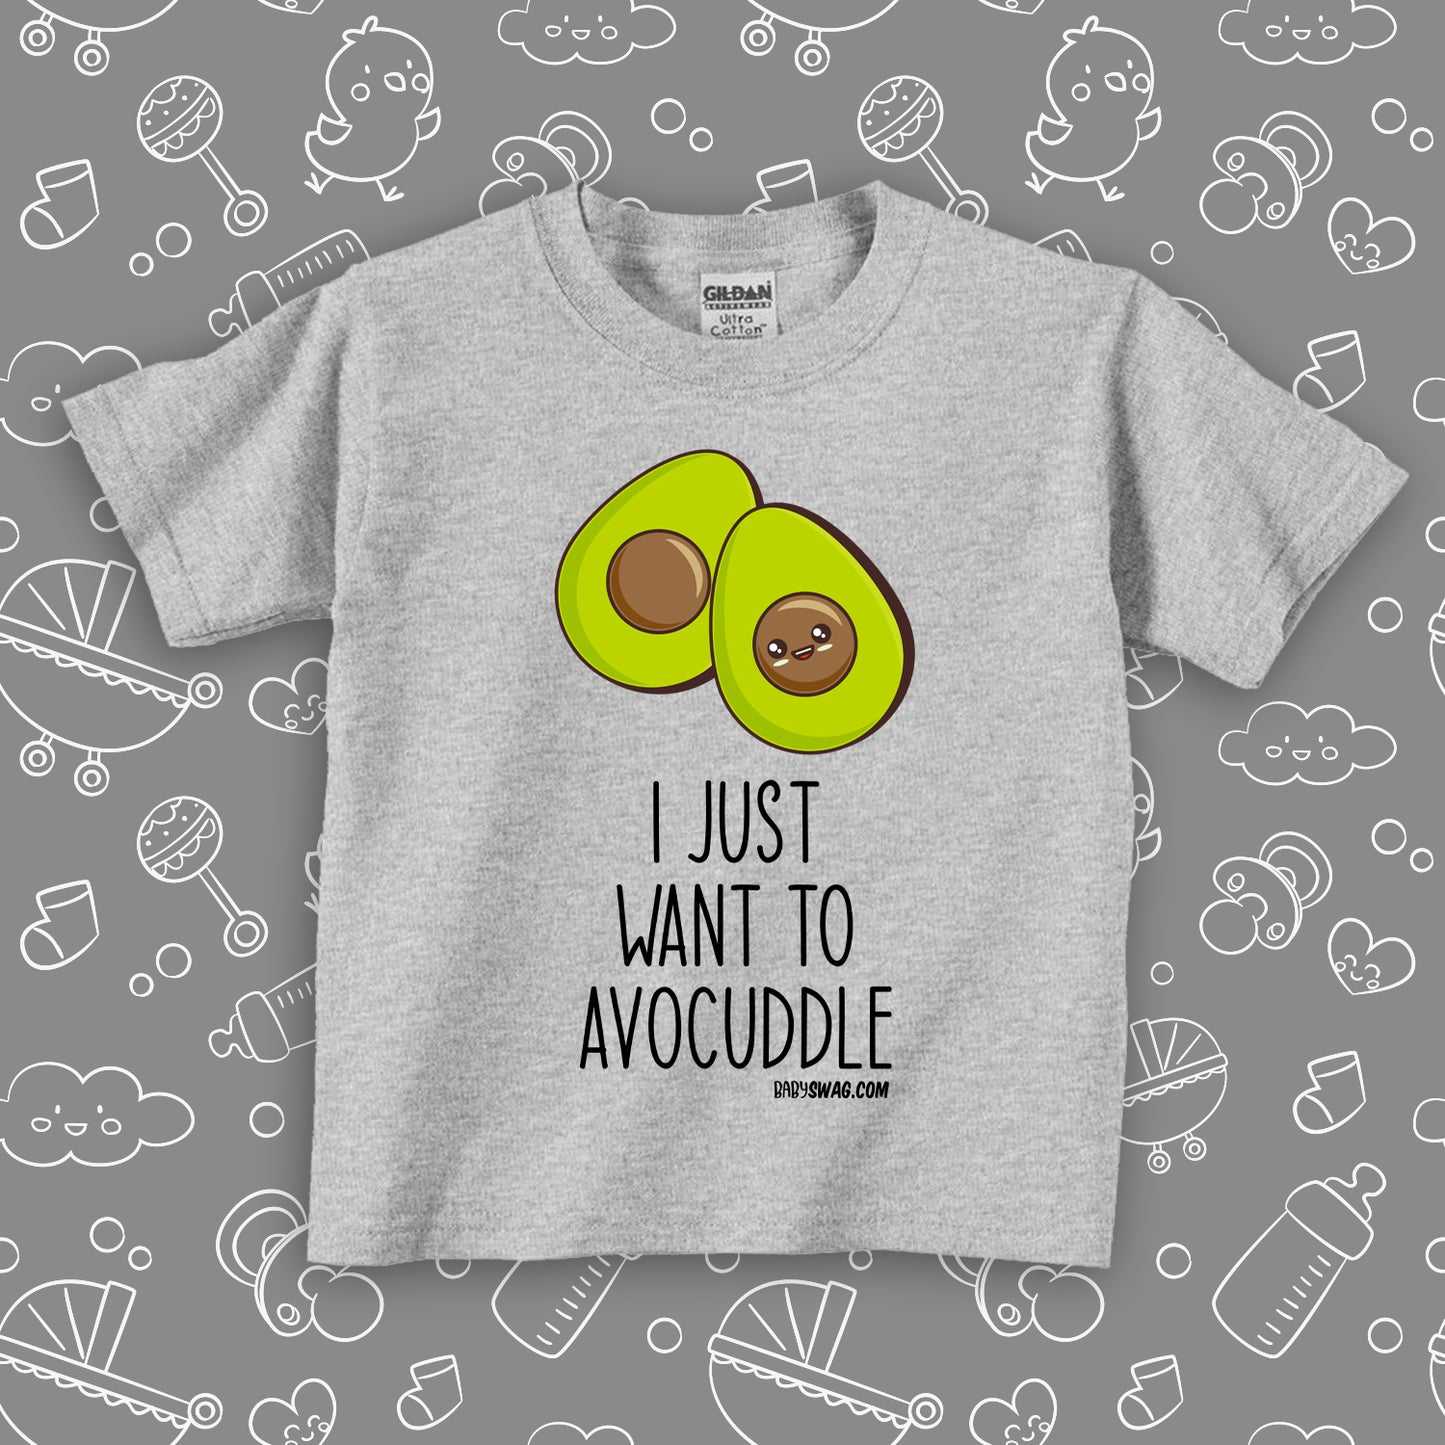 Toddler graphic tees with saying "I Just Want To Avocaddle" in grey. 